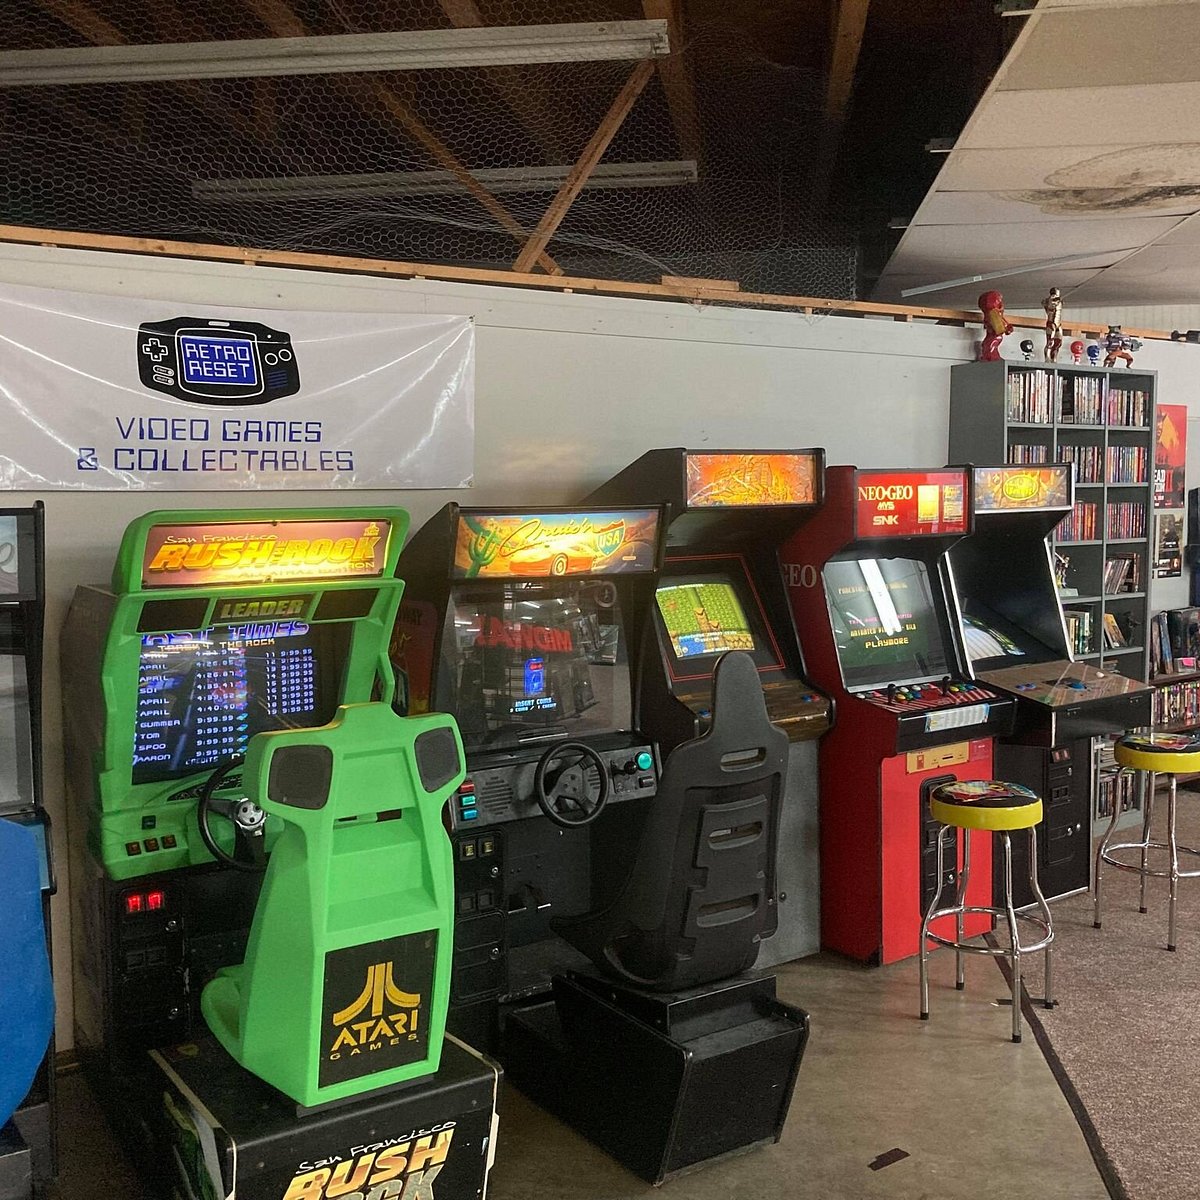 Visit Back In The Game Video Games at any of our 3 locations. Shop retro  games, new releases, and get your systems/electronics repaired!  🔥Crestwood:, By Back in The Game Video Games